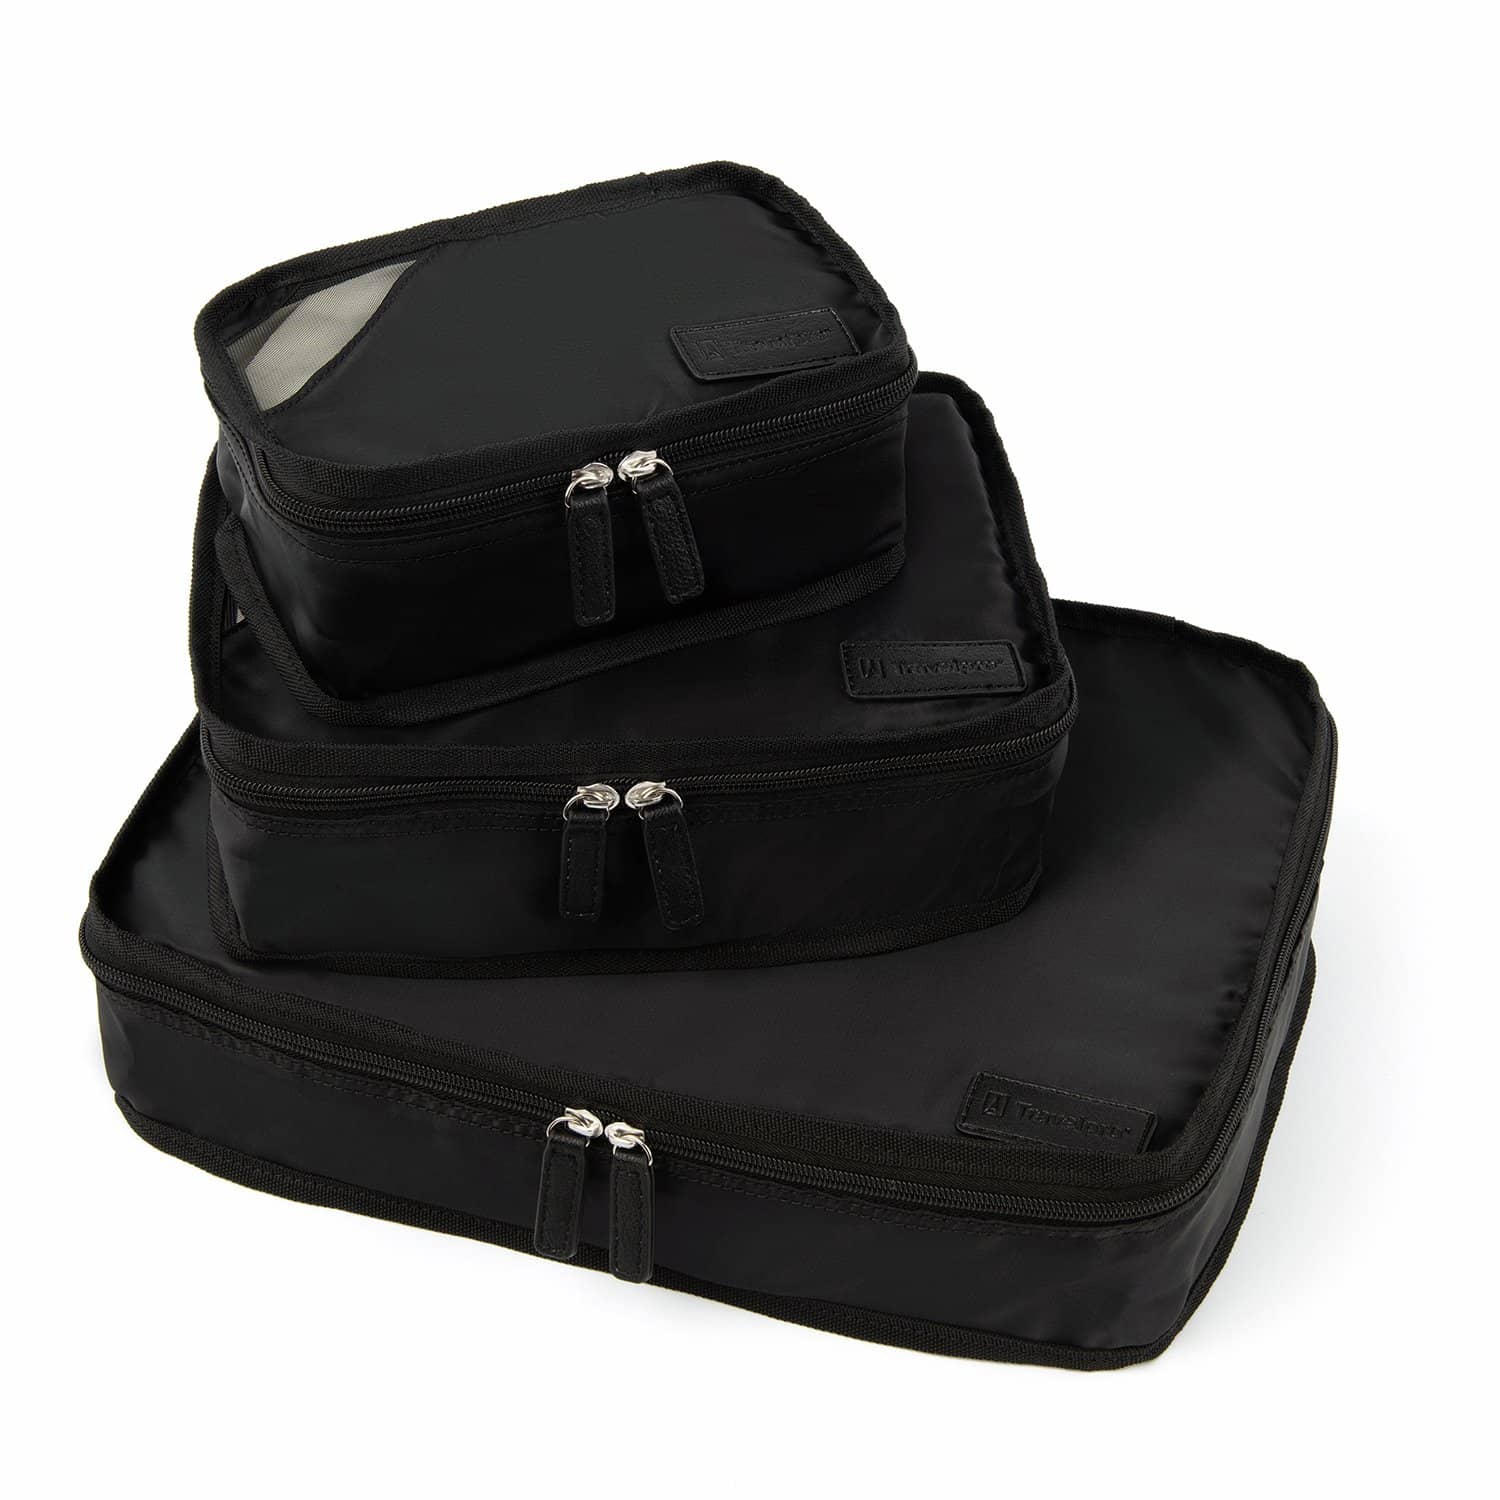 Travelpro essentials 3 pack packing cube set=